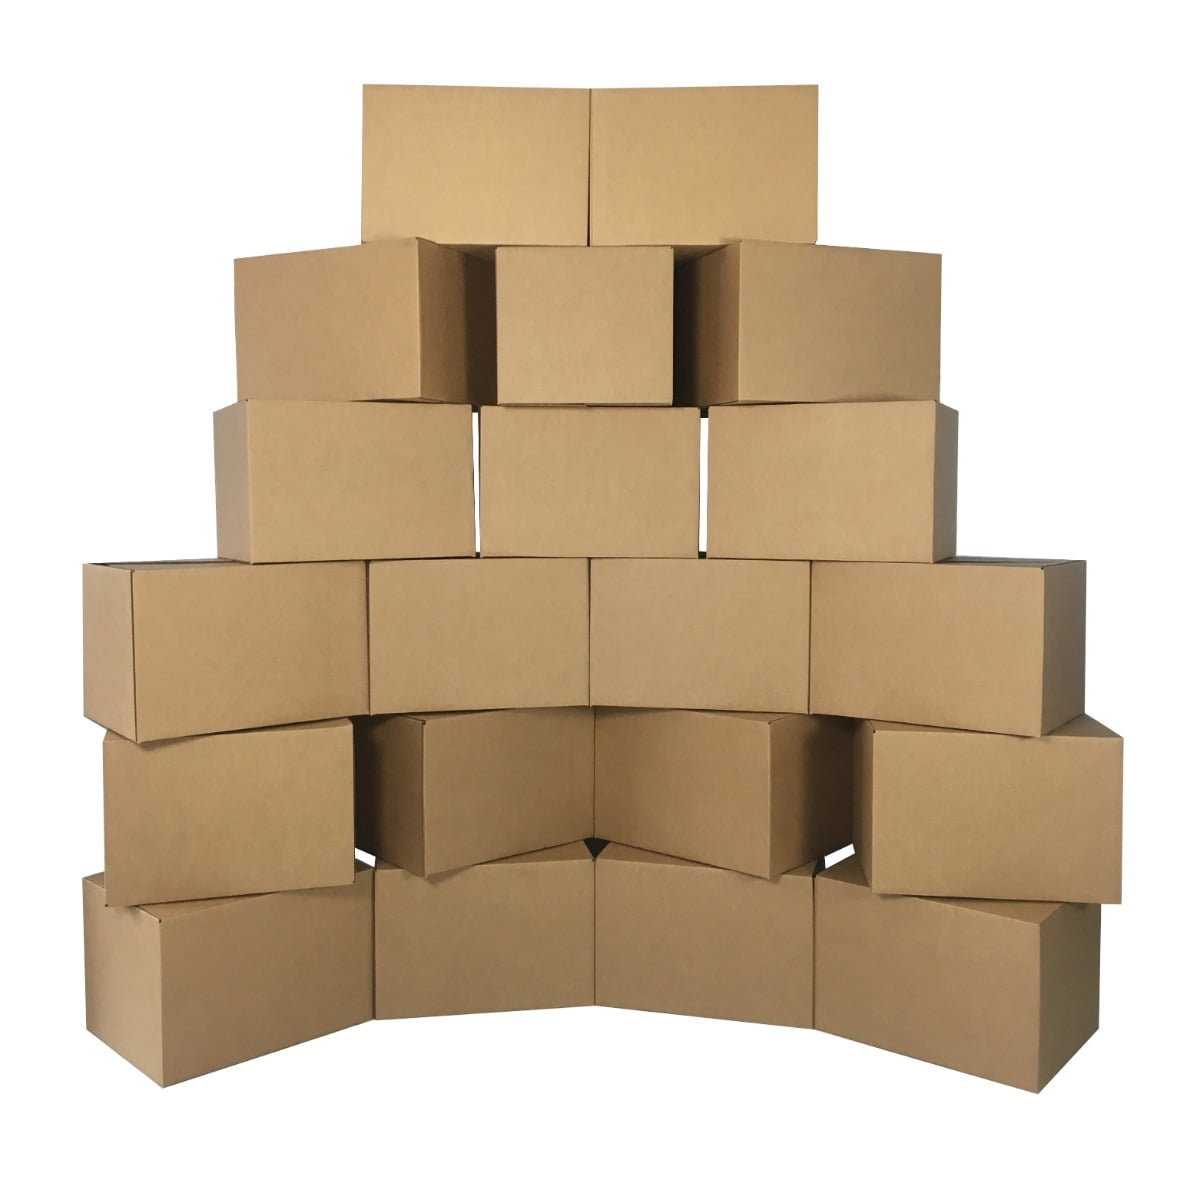 NEW DOUBLE WALL CARDBOARD POSTAL BOXES 14 x 10 x 12" CHEAP OFFER *SELECT QTY* 